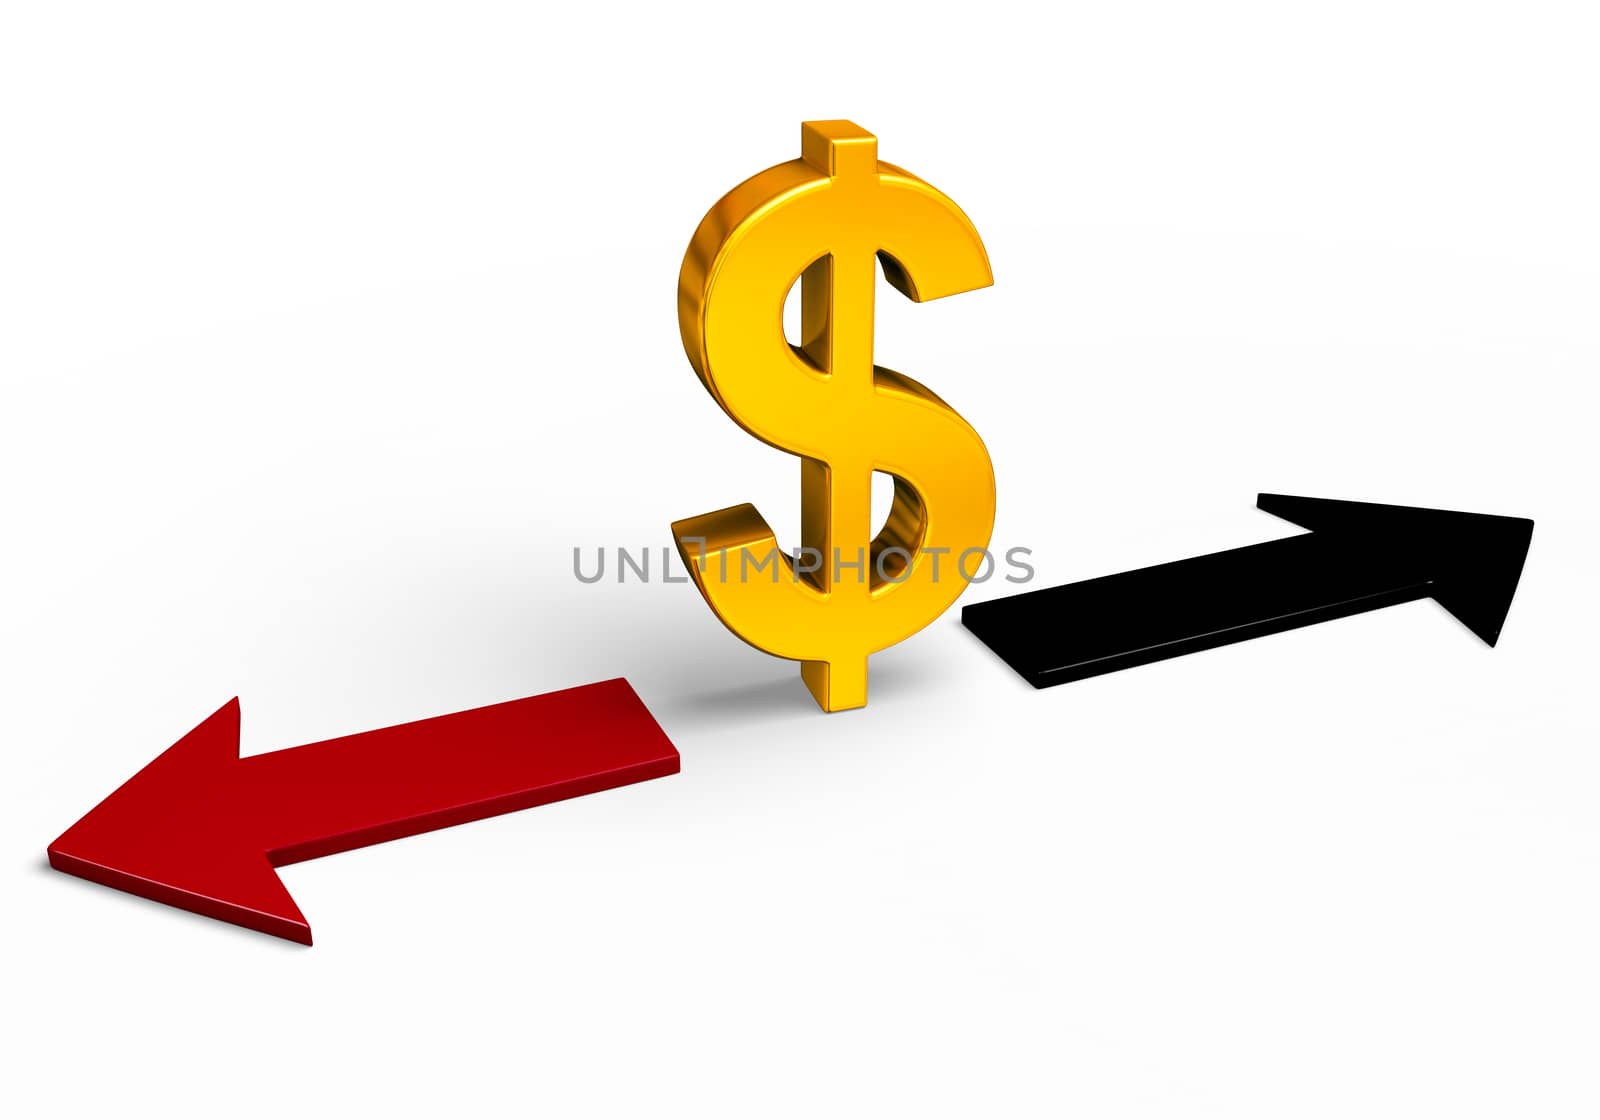 A bright, gold dollar sign stands between a red arrow pointing back towards losses and a black arrow pointing forward towards gains.  Isolated on white.
